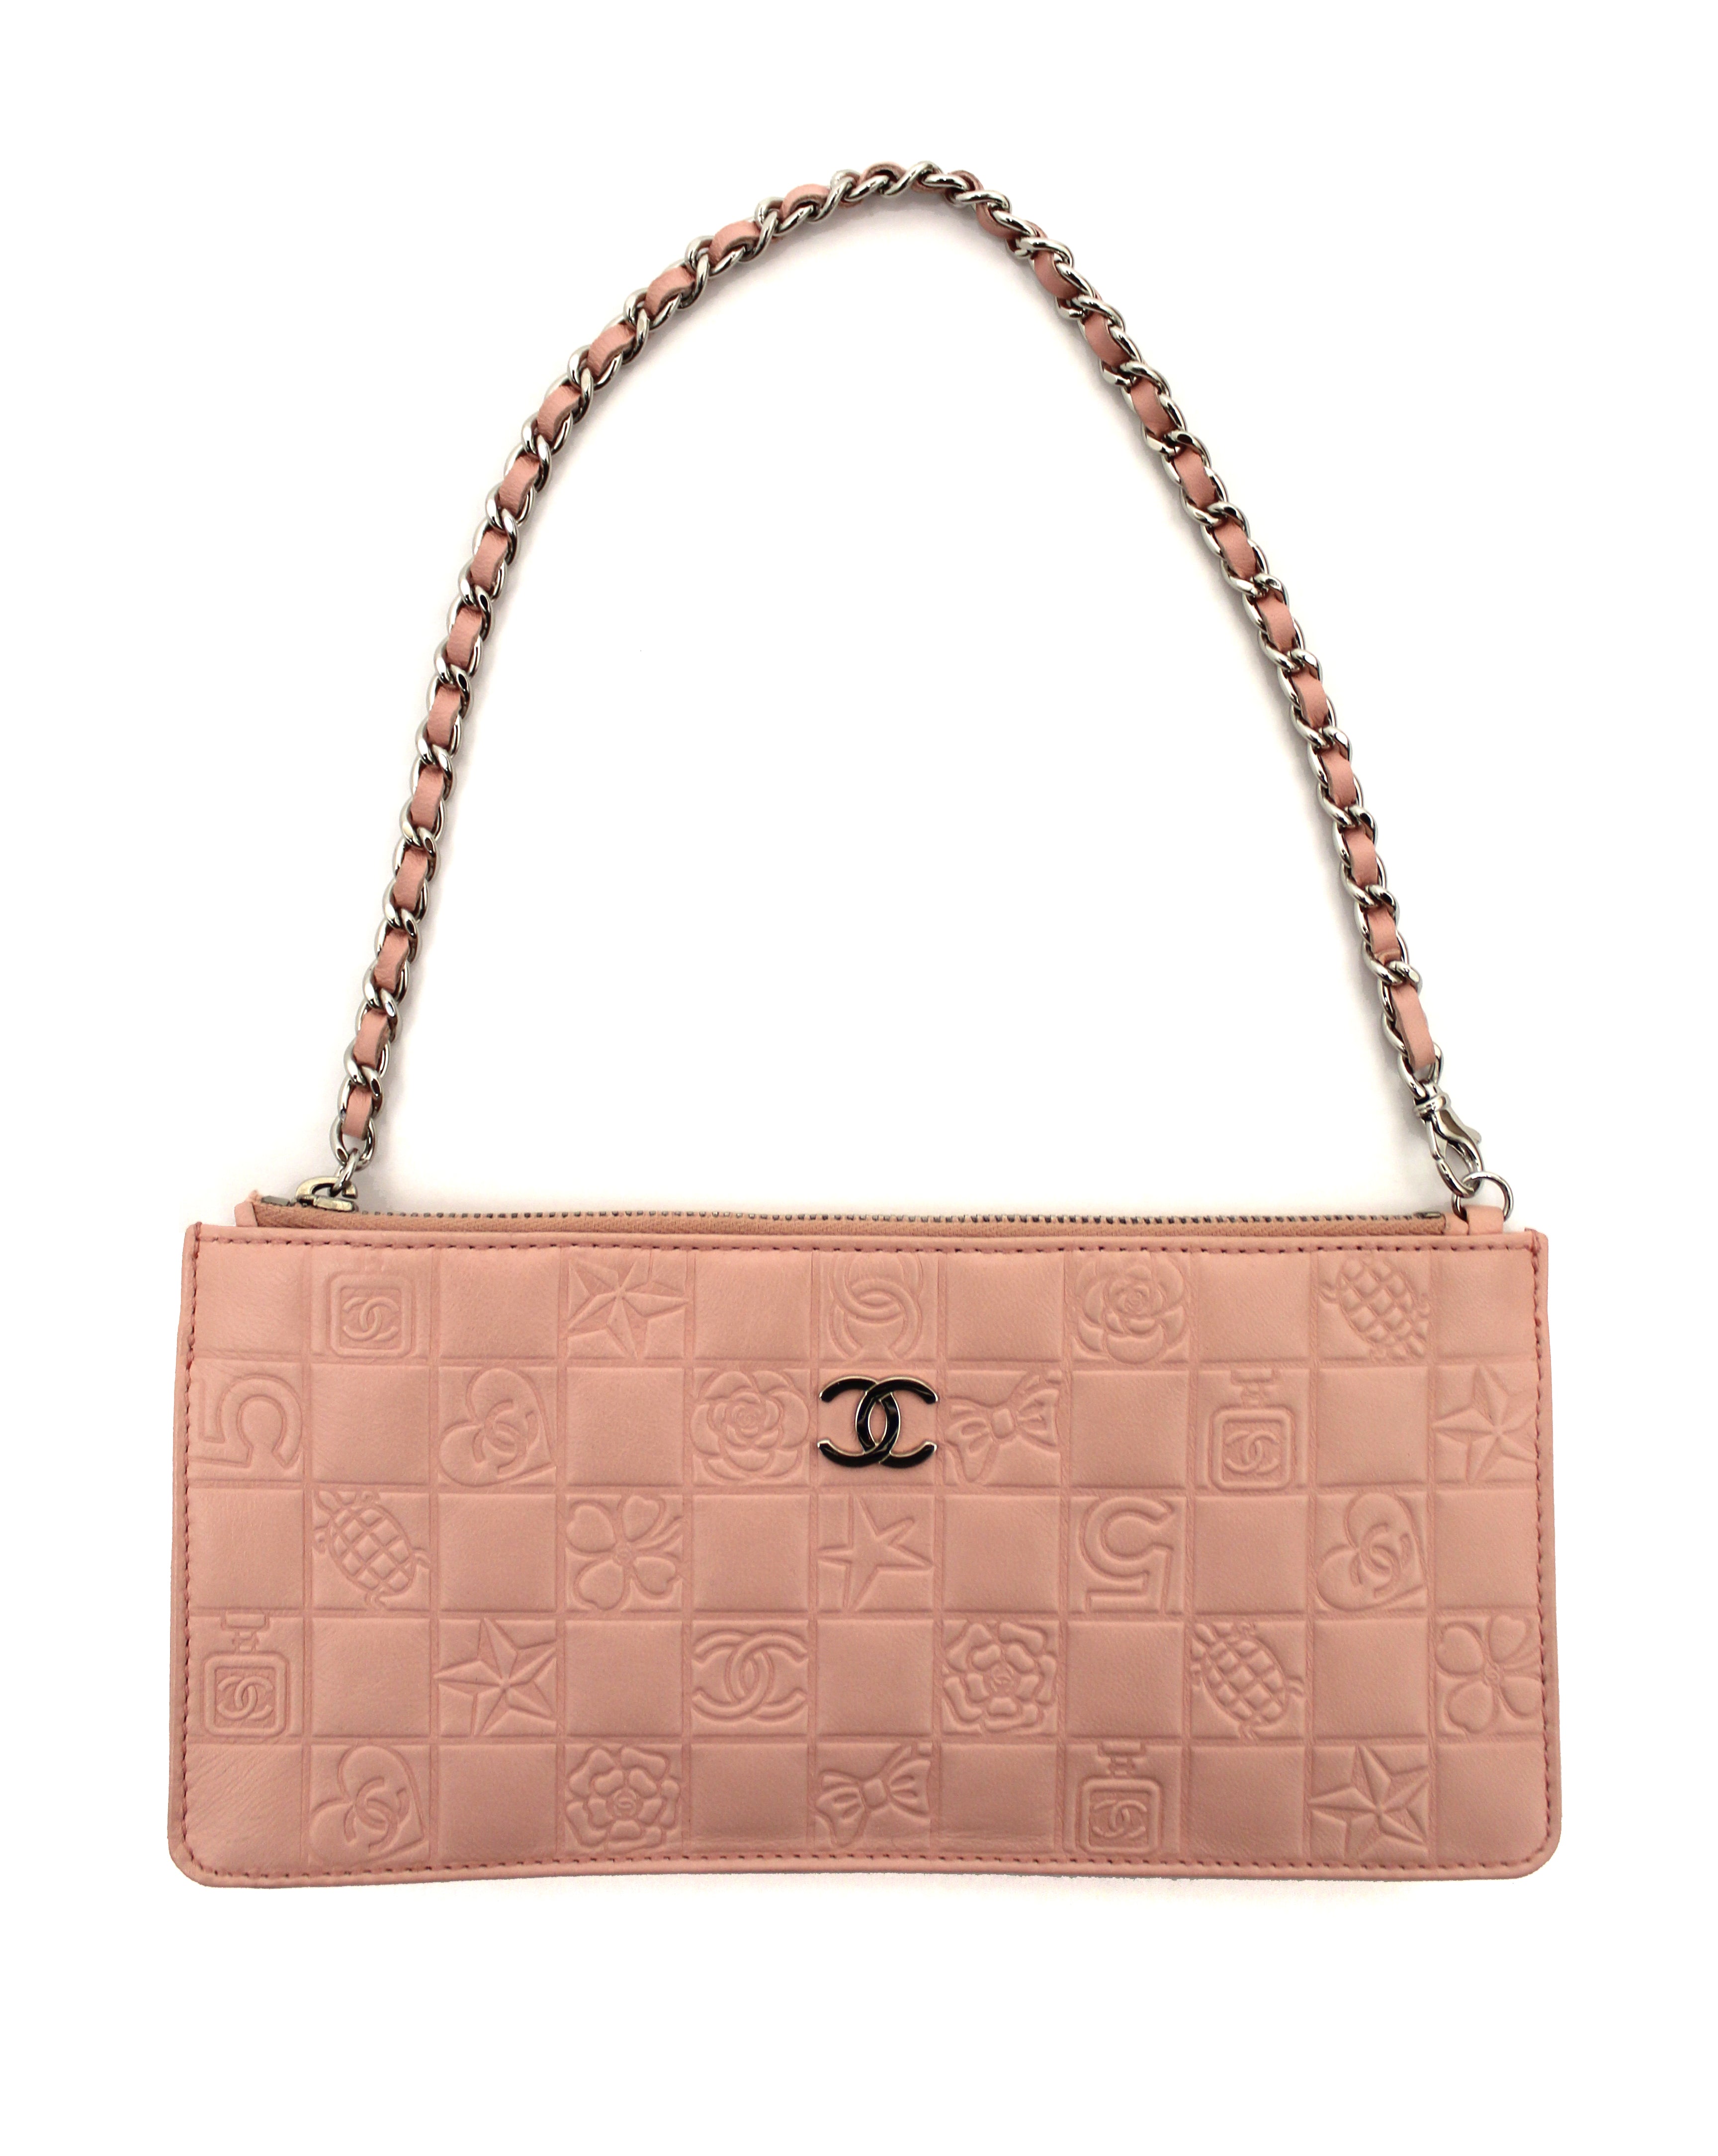 Sold at Auction: Chanel - Lucky Symbols Charms Beige Cream